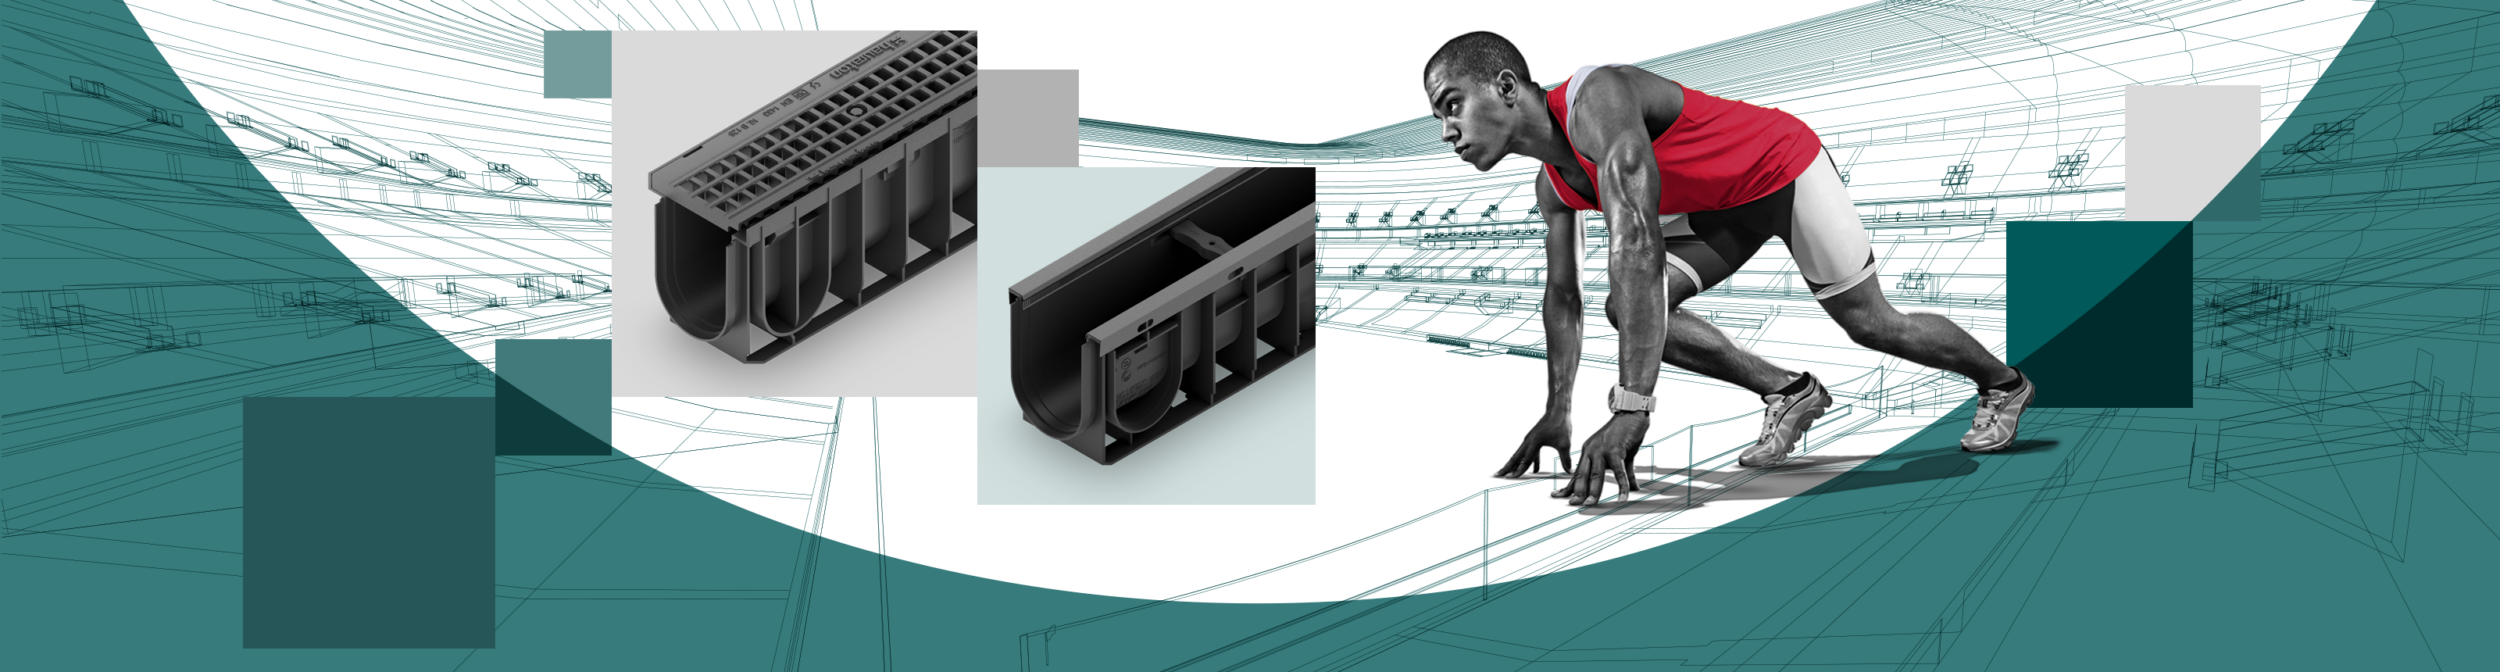 SPORTFIX series offer a wide range of solutions for sports facilities